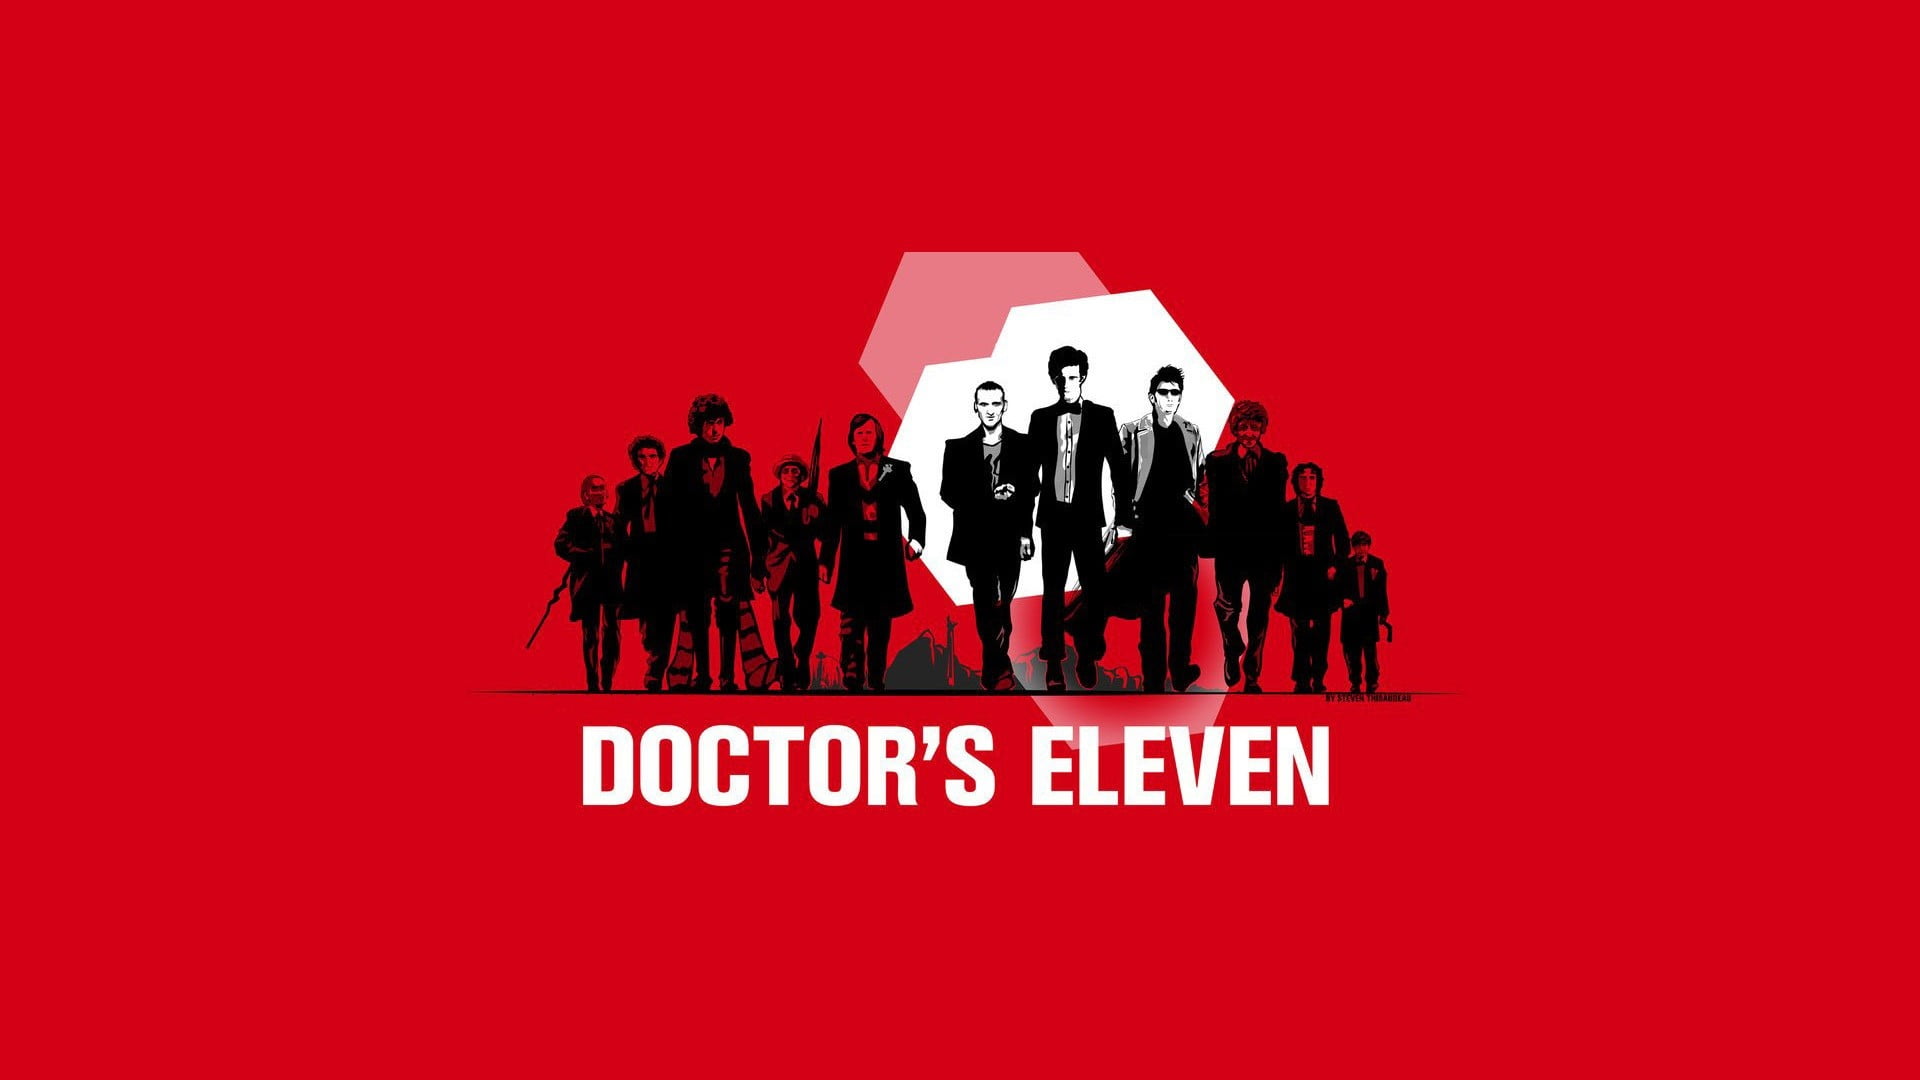 Doctor's Eleven poster, Doctor Who, The Doctor, Christopher Eccleston, David Tennant